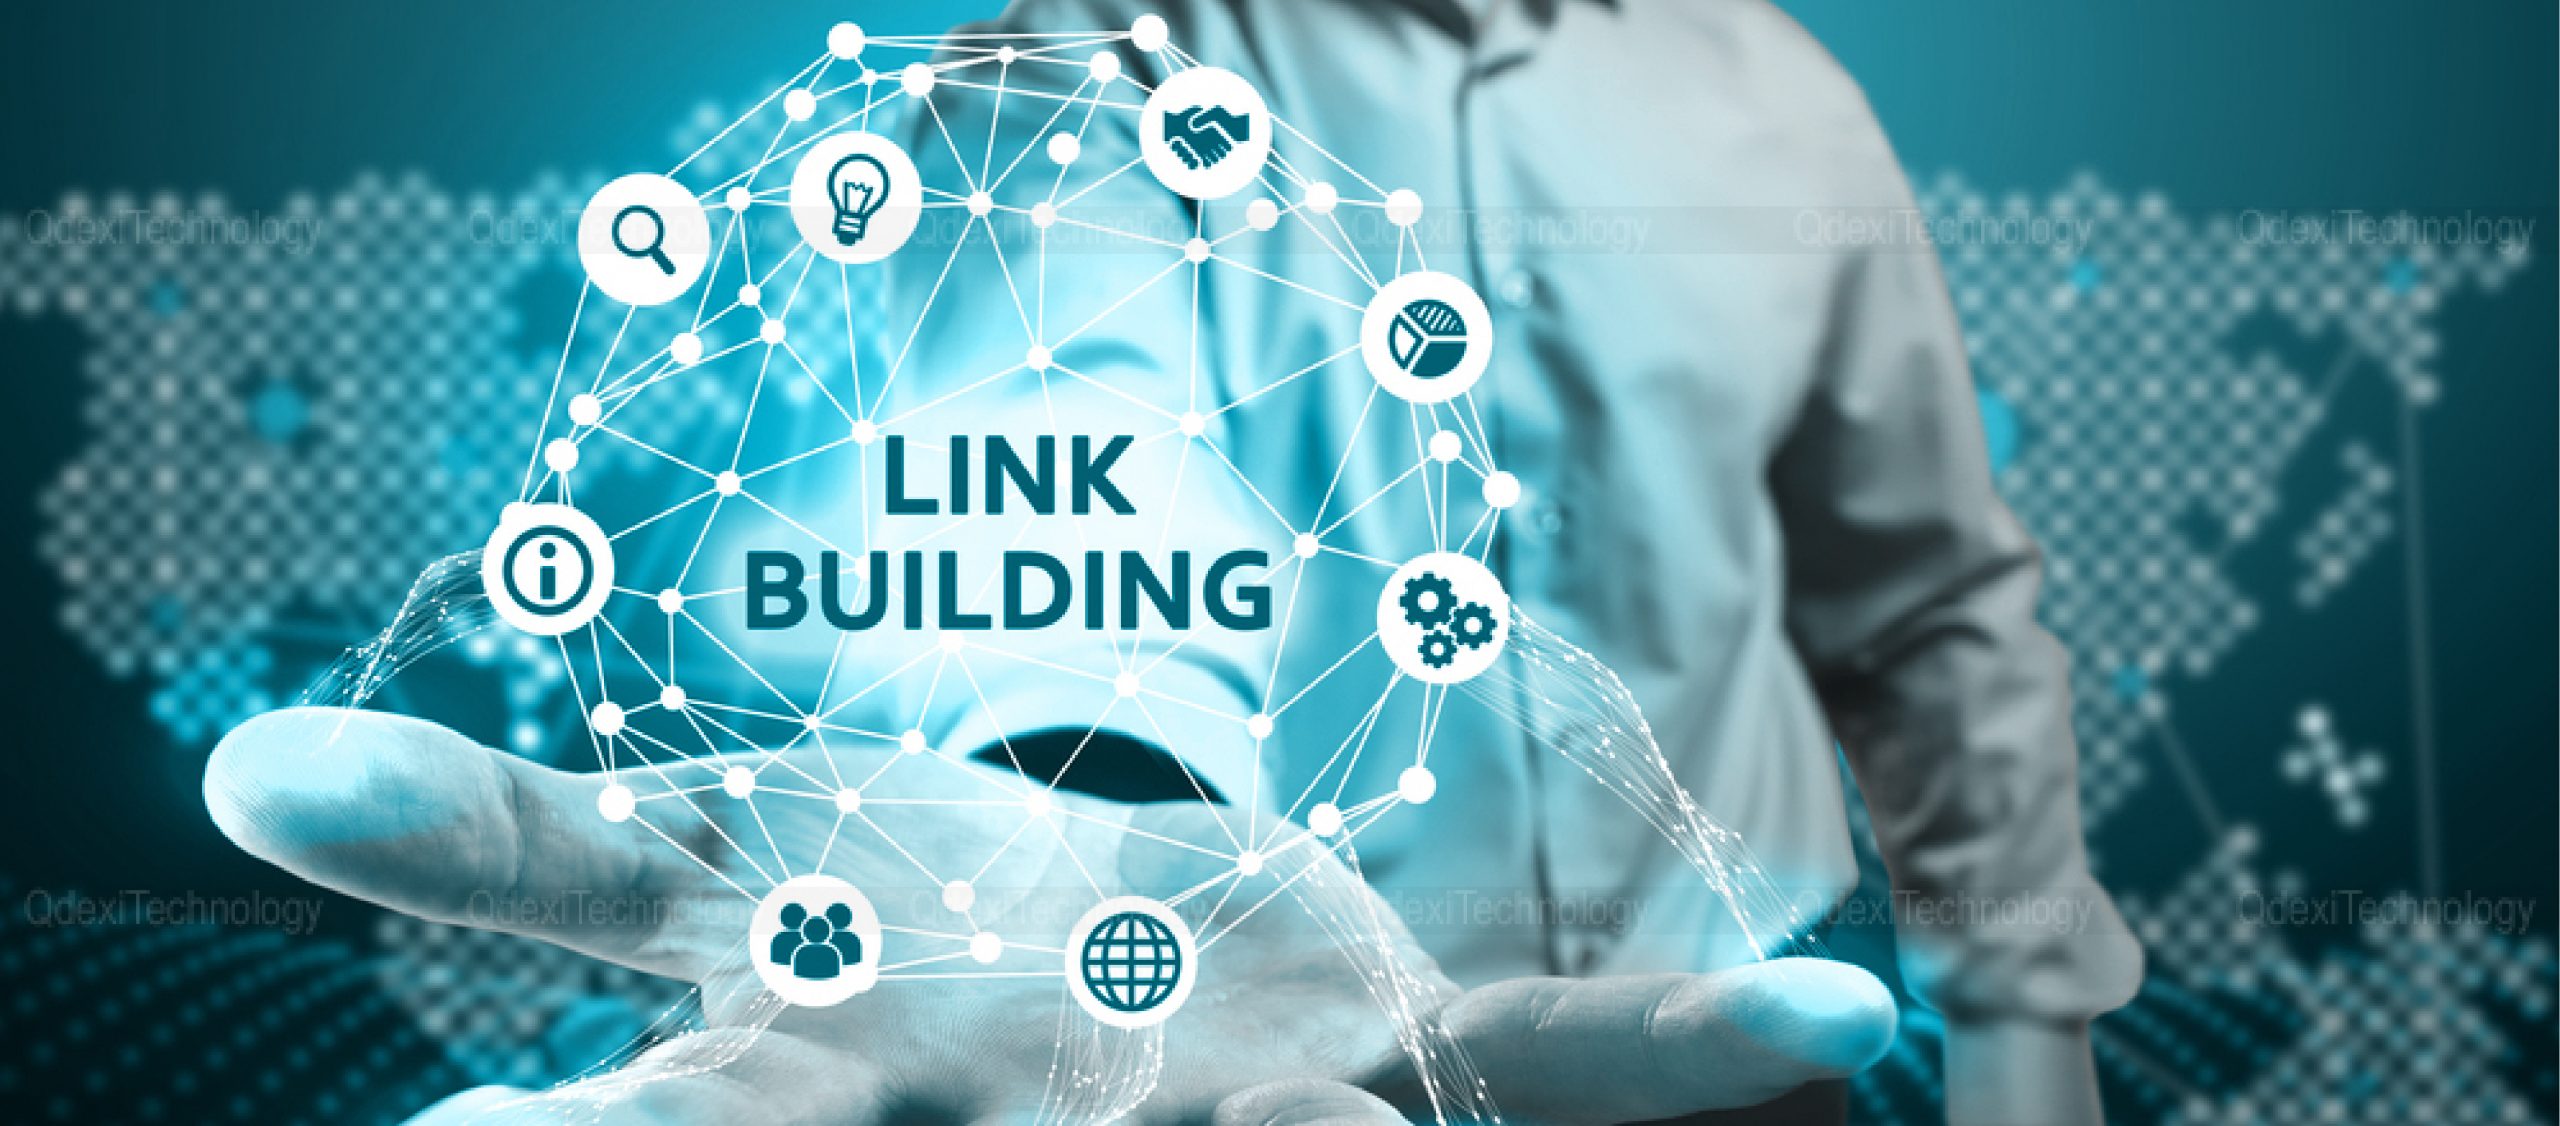 How Building Link Can Give Benefits to Your Websites